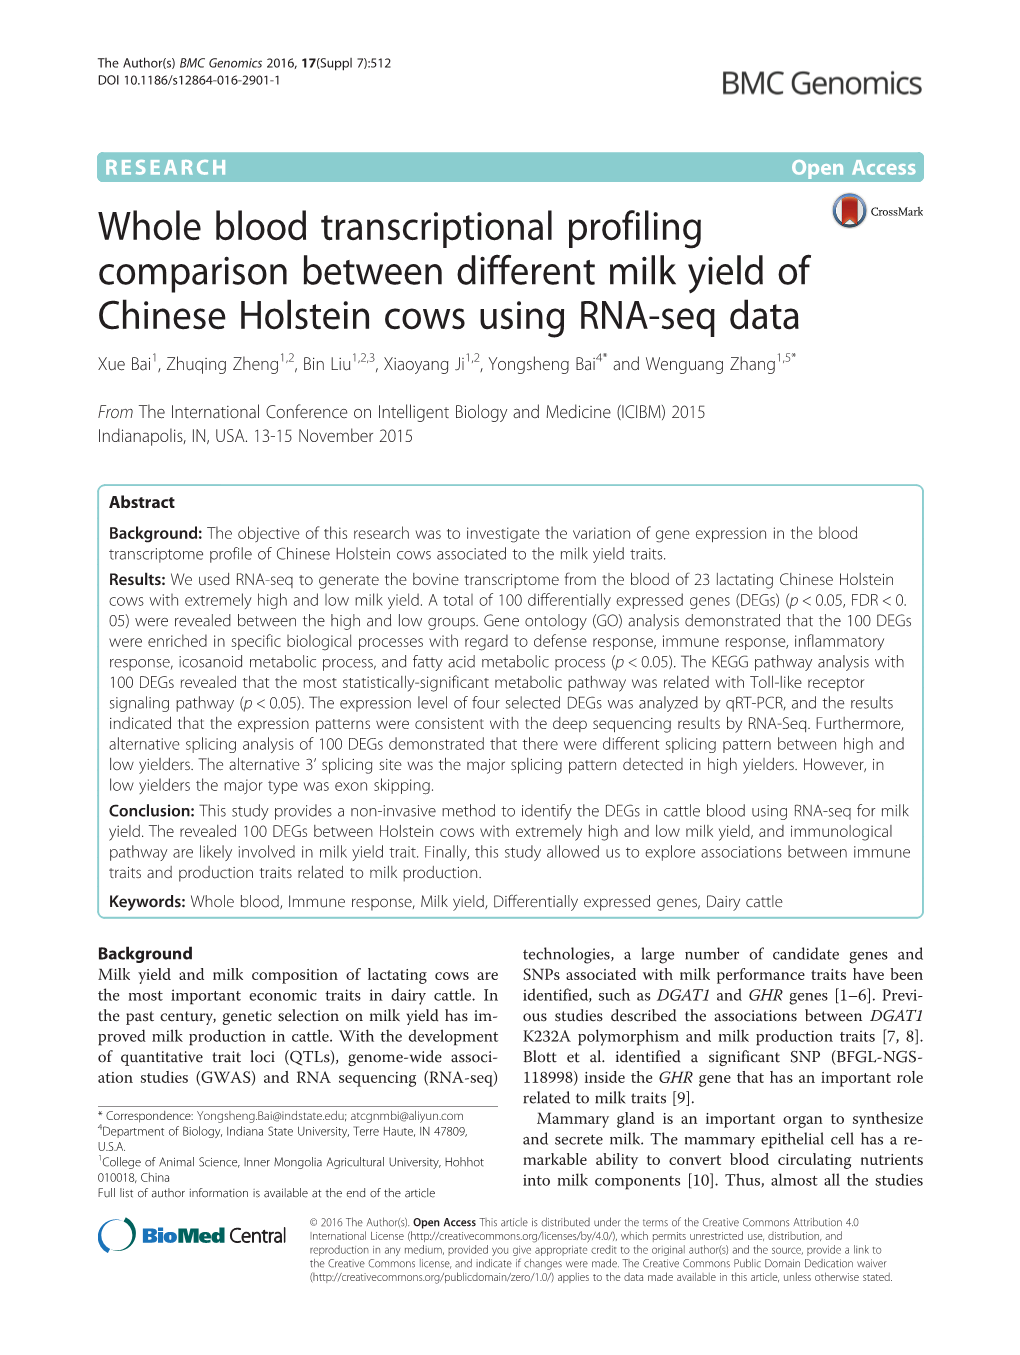 Whole Blood Transcriptional Profiling Comparison Between Different Milk Yield of Chinese Holstein Cows Using RNA-Seq Data